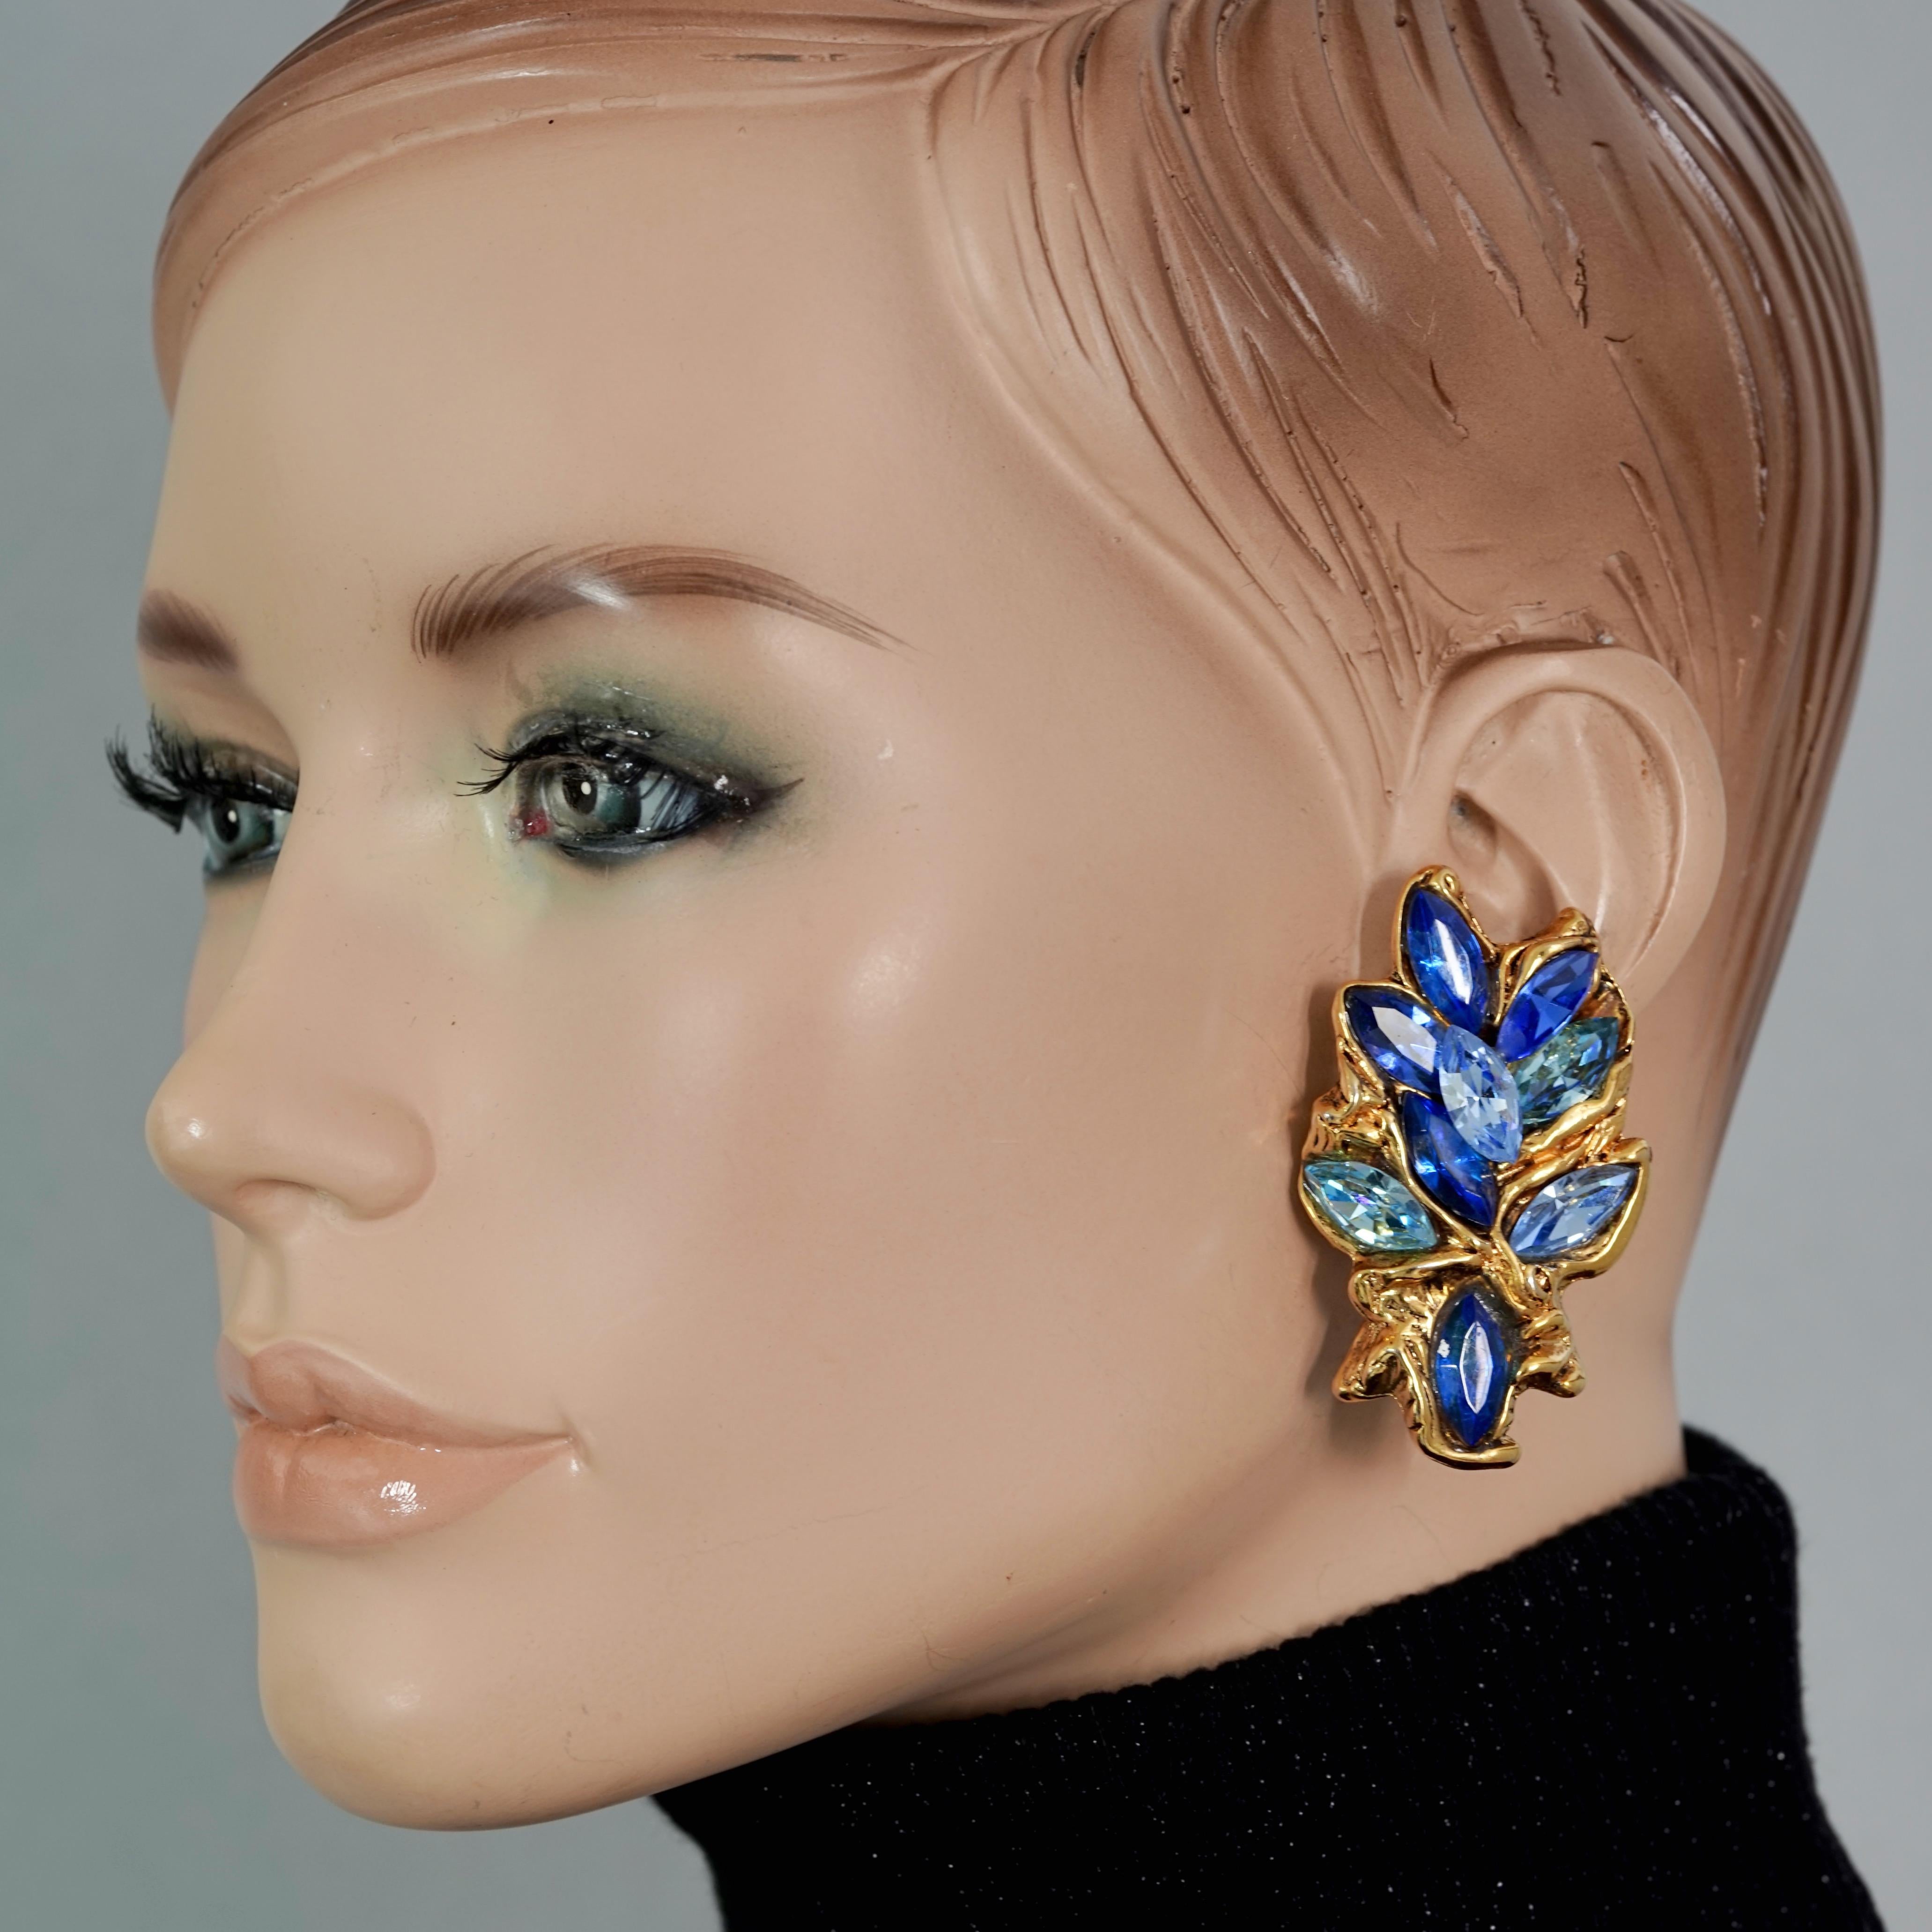 Vintage KALINGER PARIS Blue Rhinestones Massive Jewelled Earrings

Measurements:
Height: 2.28 inches (5.8 cm)
Width: 1.38 inches (3.5 cm)
Weight per Earring: 31 grams

Features:
- 100% Authentic KALINGER PARIS.
- Massive jewelled earrings